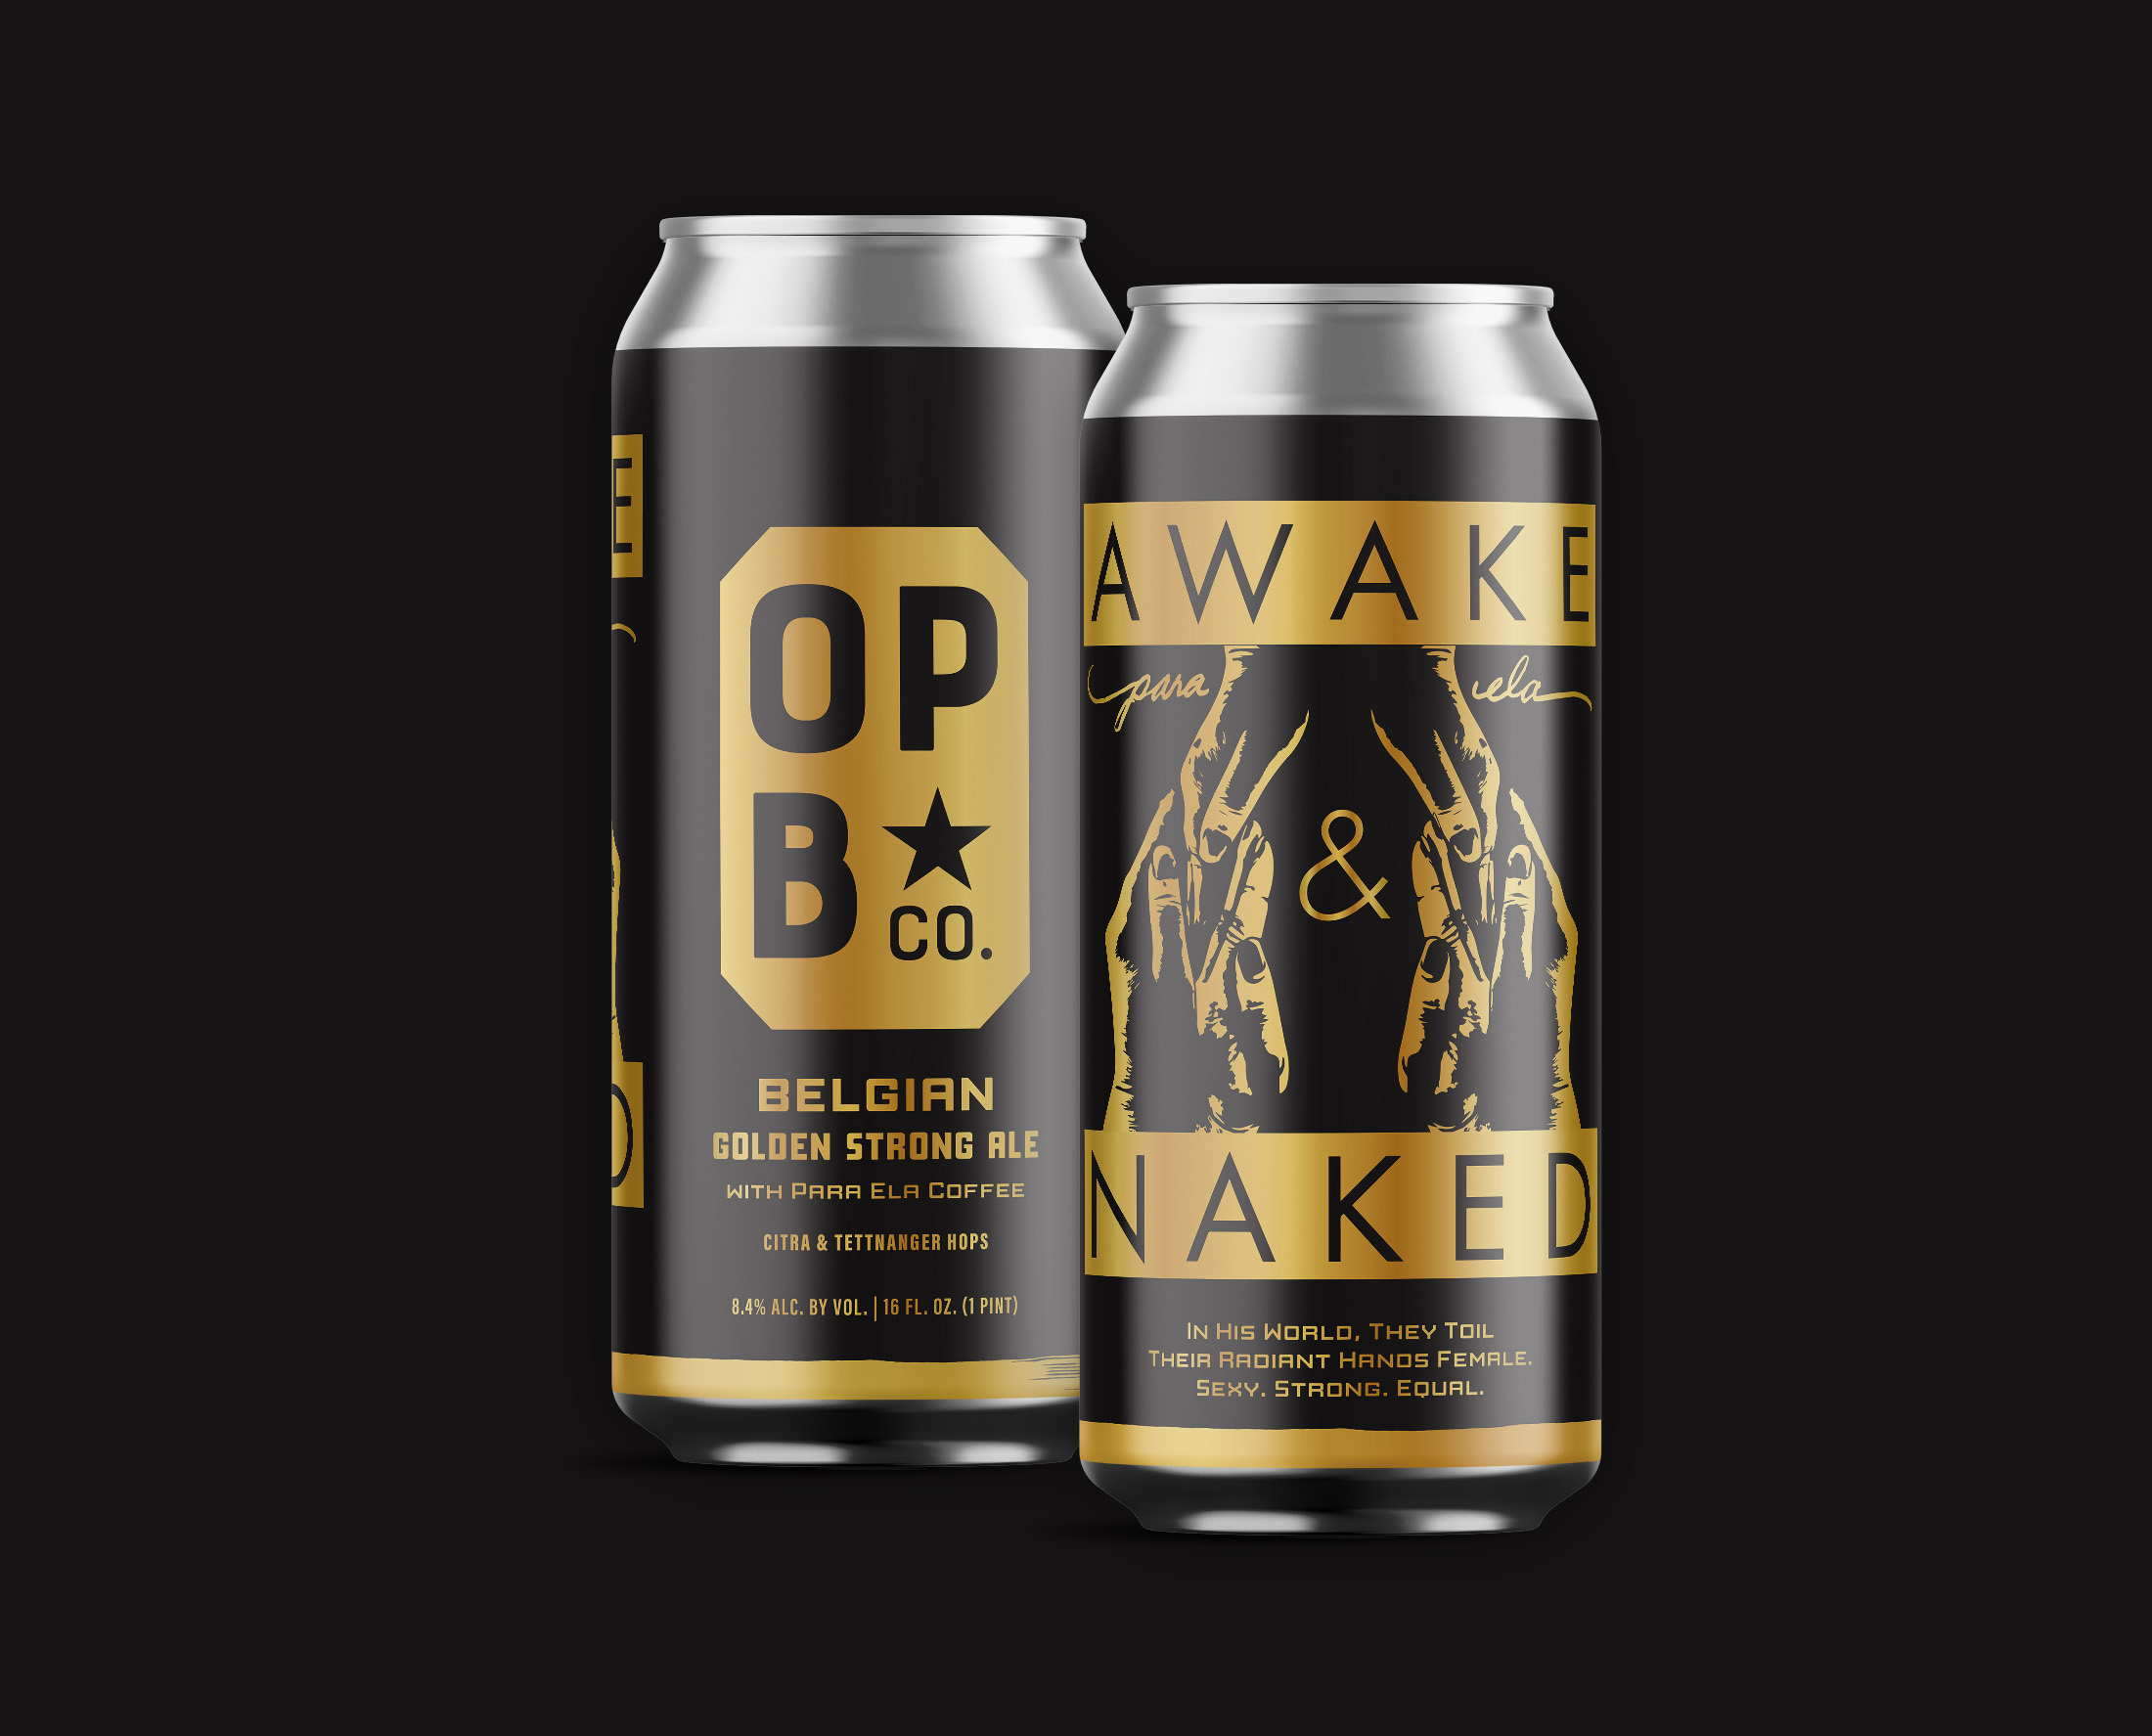 Digital rendering awake naked Belgian golden strong ale beer can. 2 cans